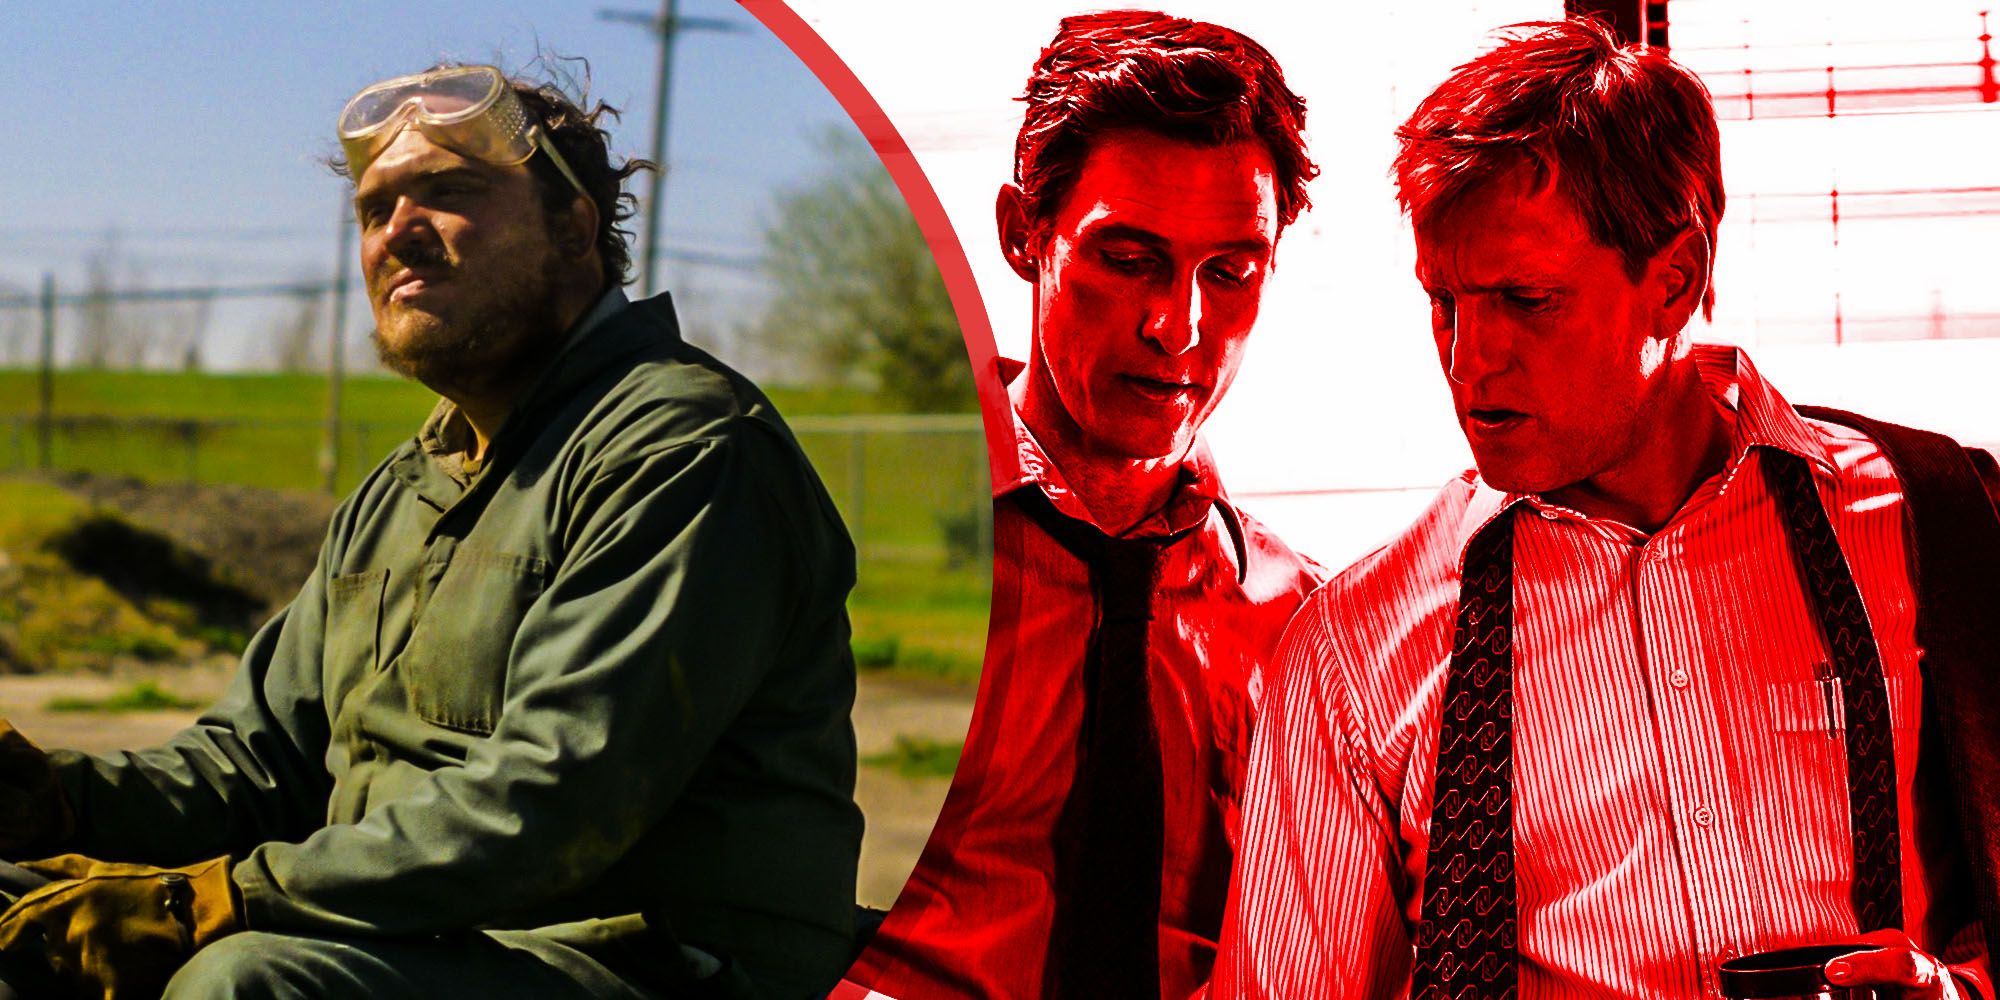 Errol Childress, Rust Cohle, and Marty Hart in True Detective season 1